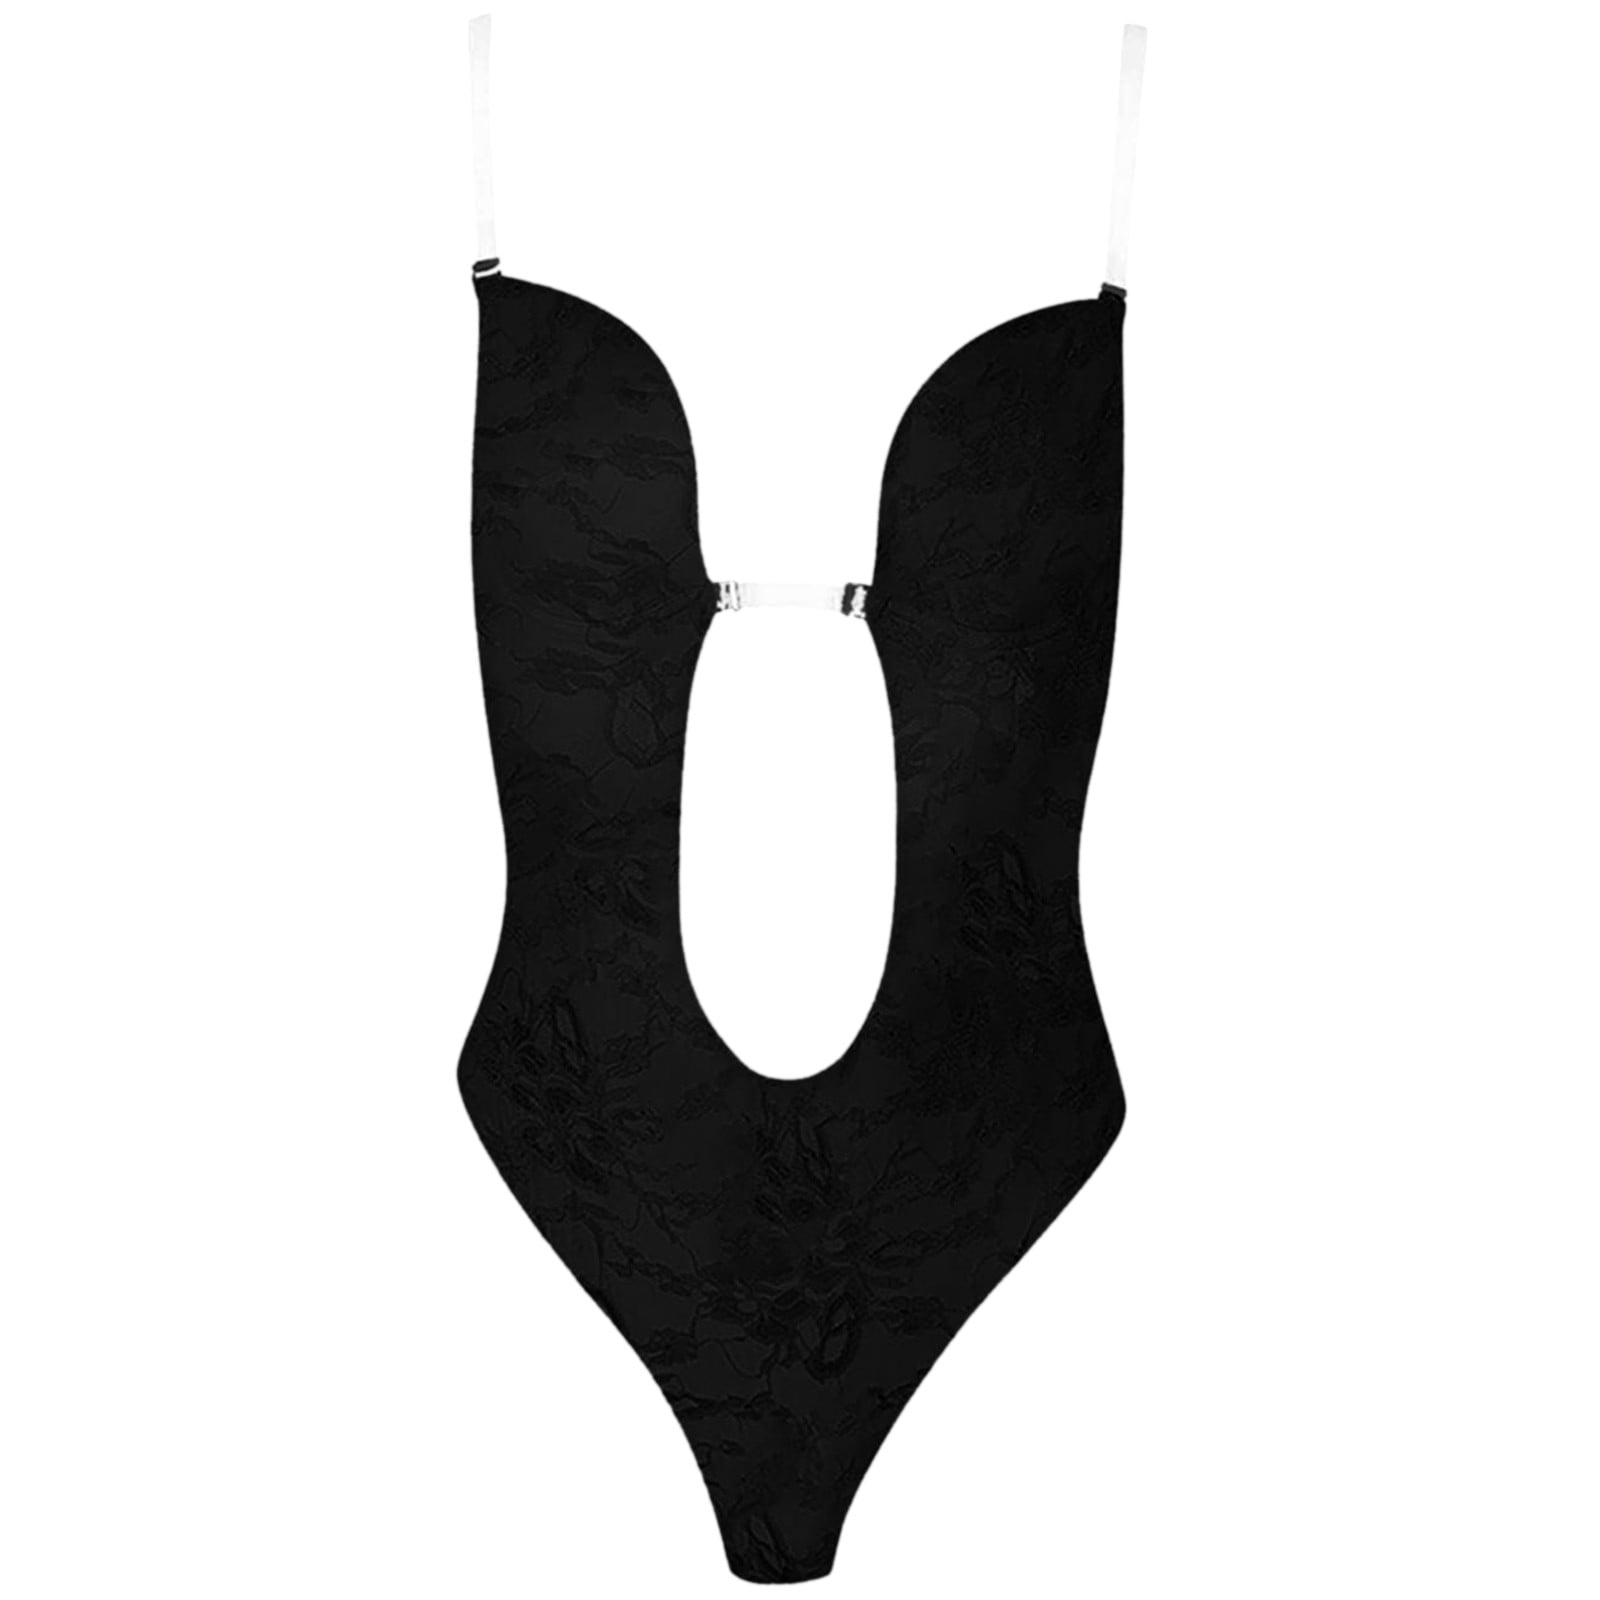 Adjustable Seamless Womens Bodysuit With Invisible Bra And Tummy Control Low  Back Strapless Shapewear From Qingxin13, $15.63